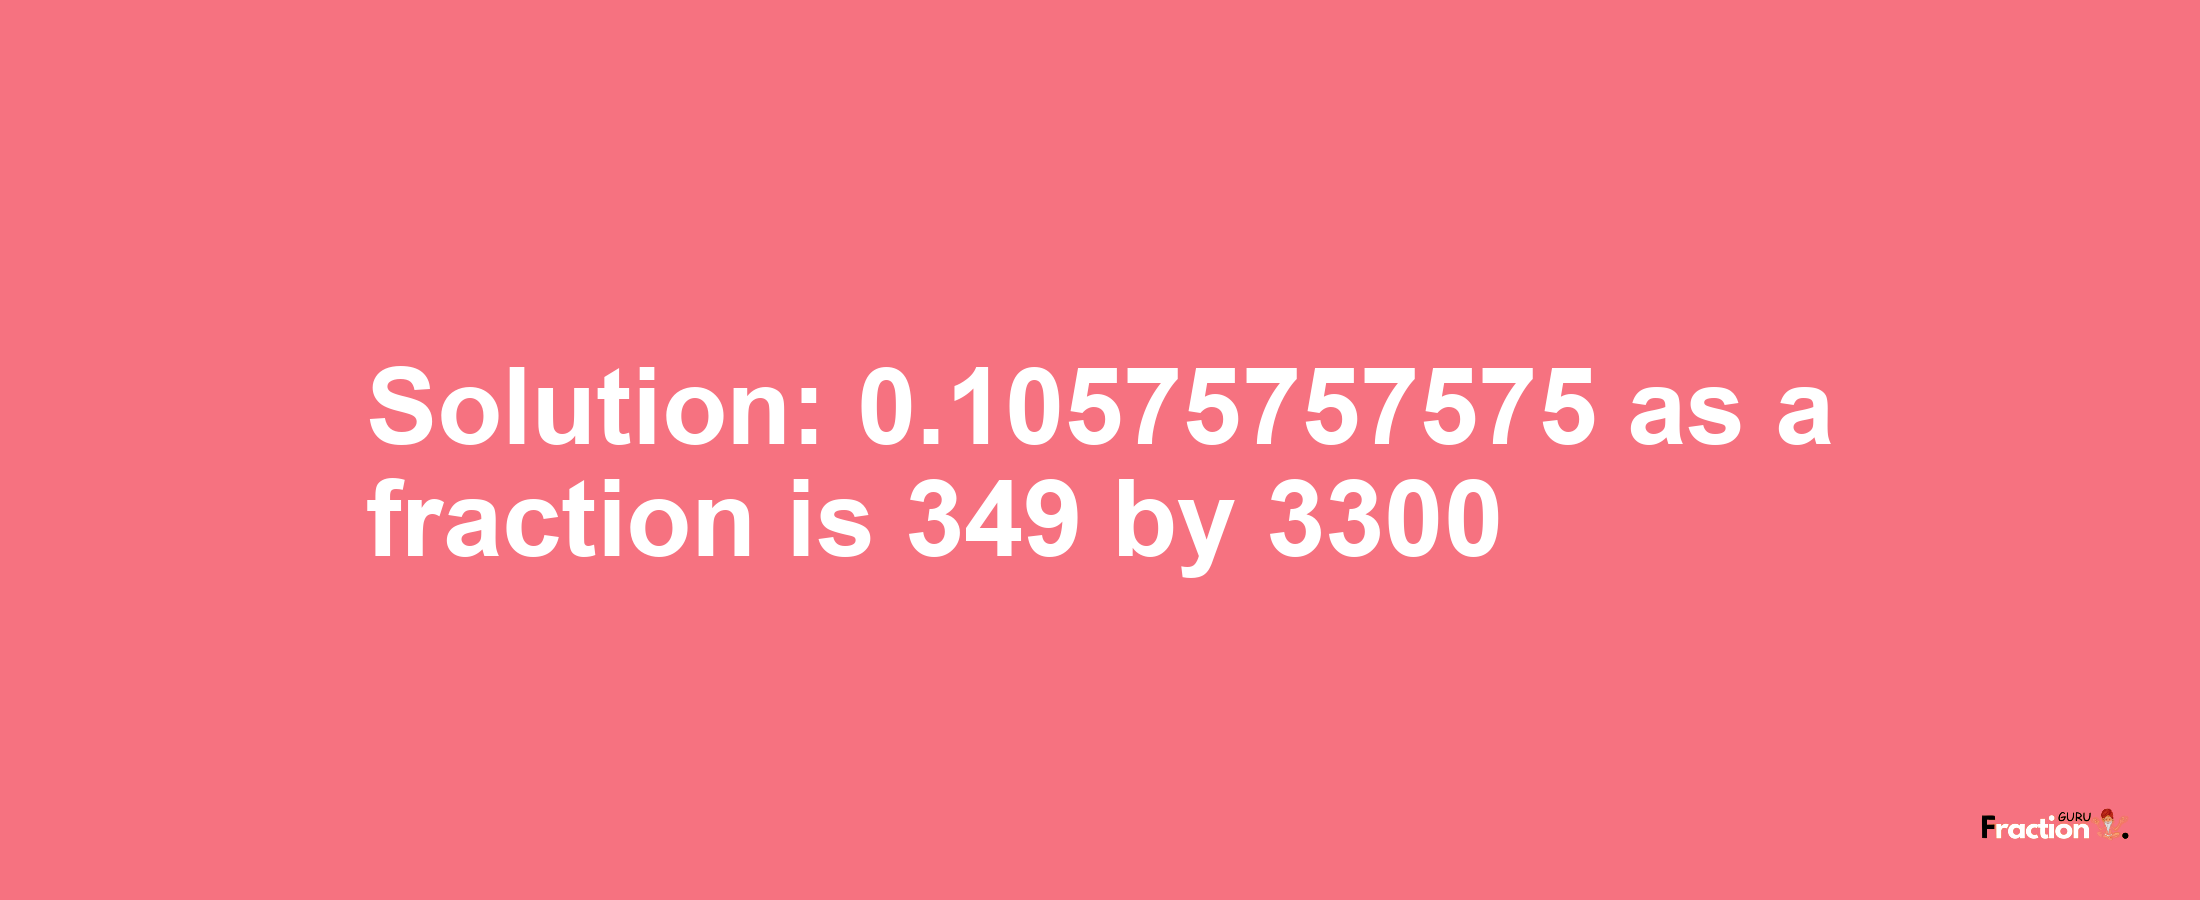 Solution:0.10575757575 as a fraction is 349/3300